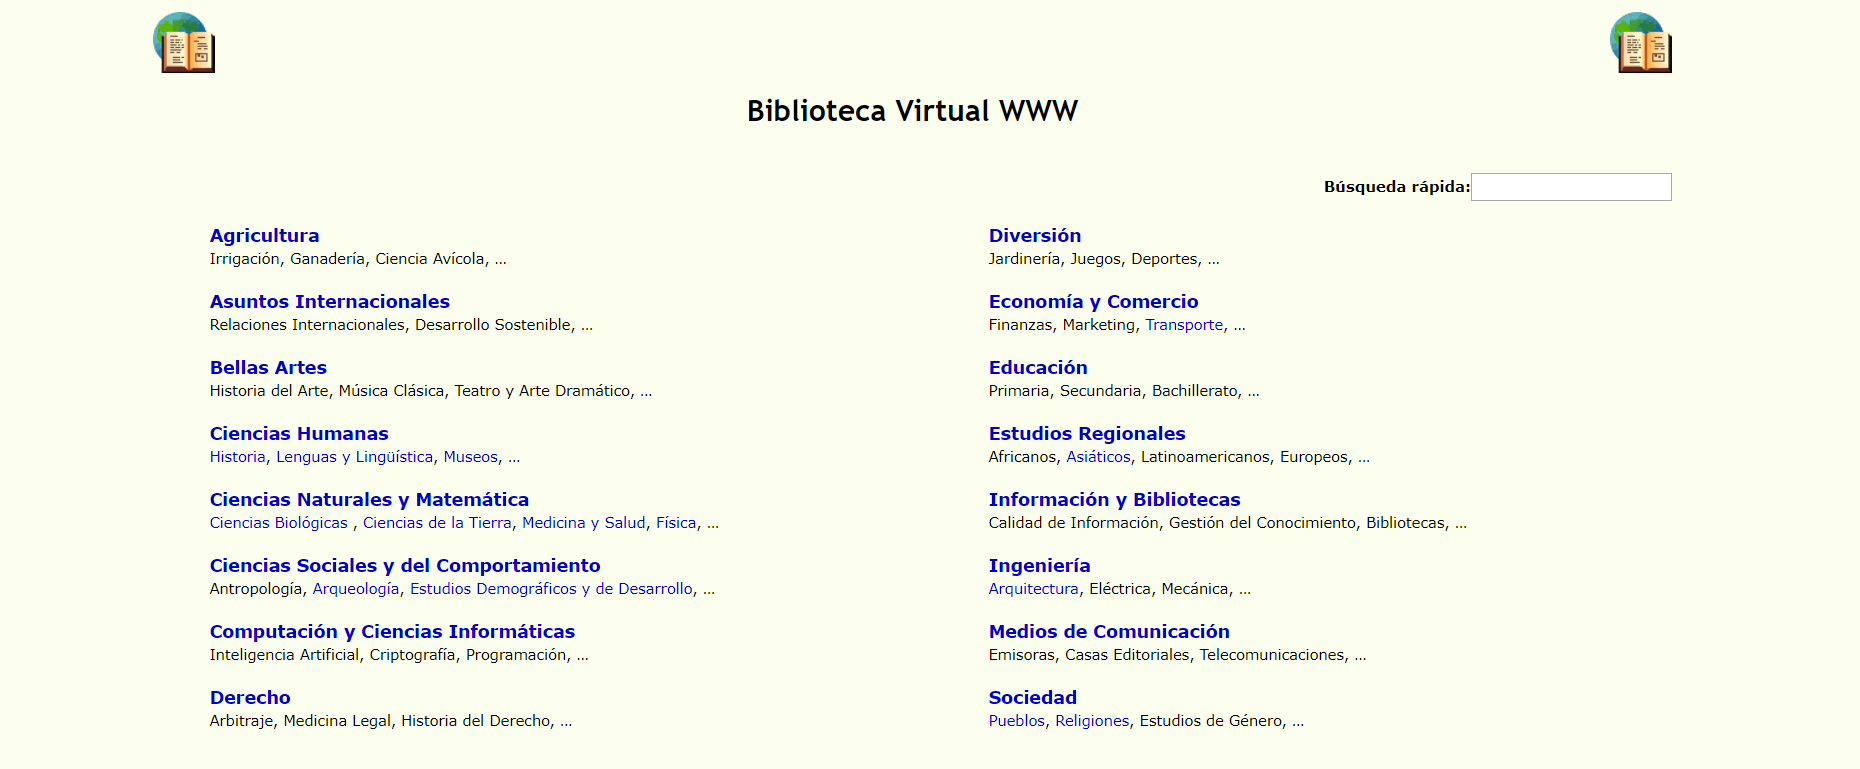 The WWW Virtual Library